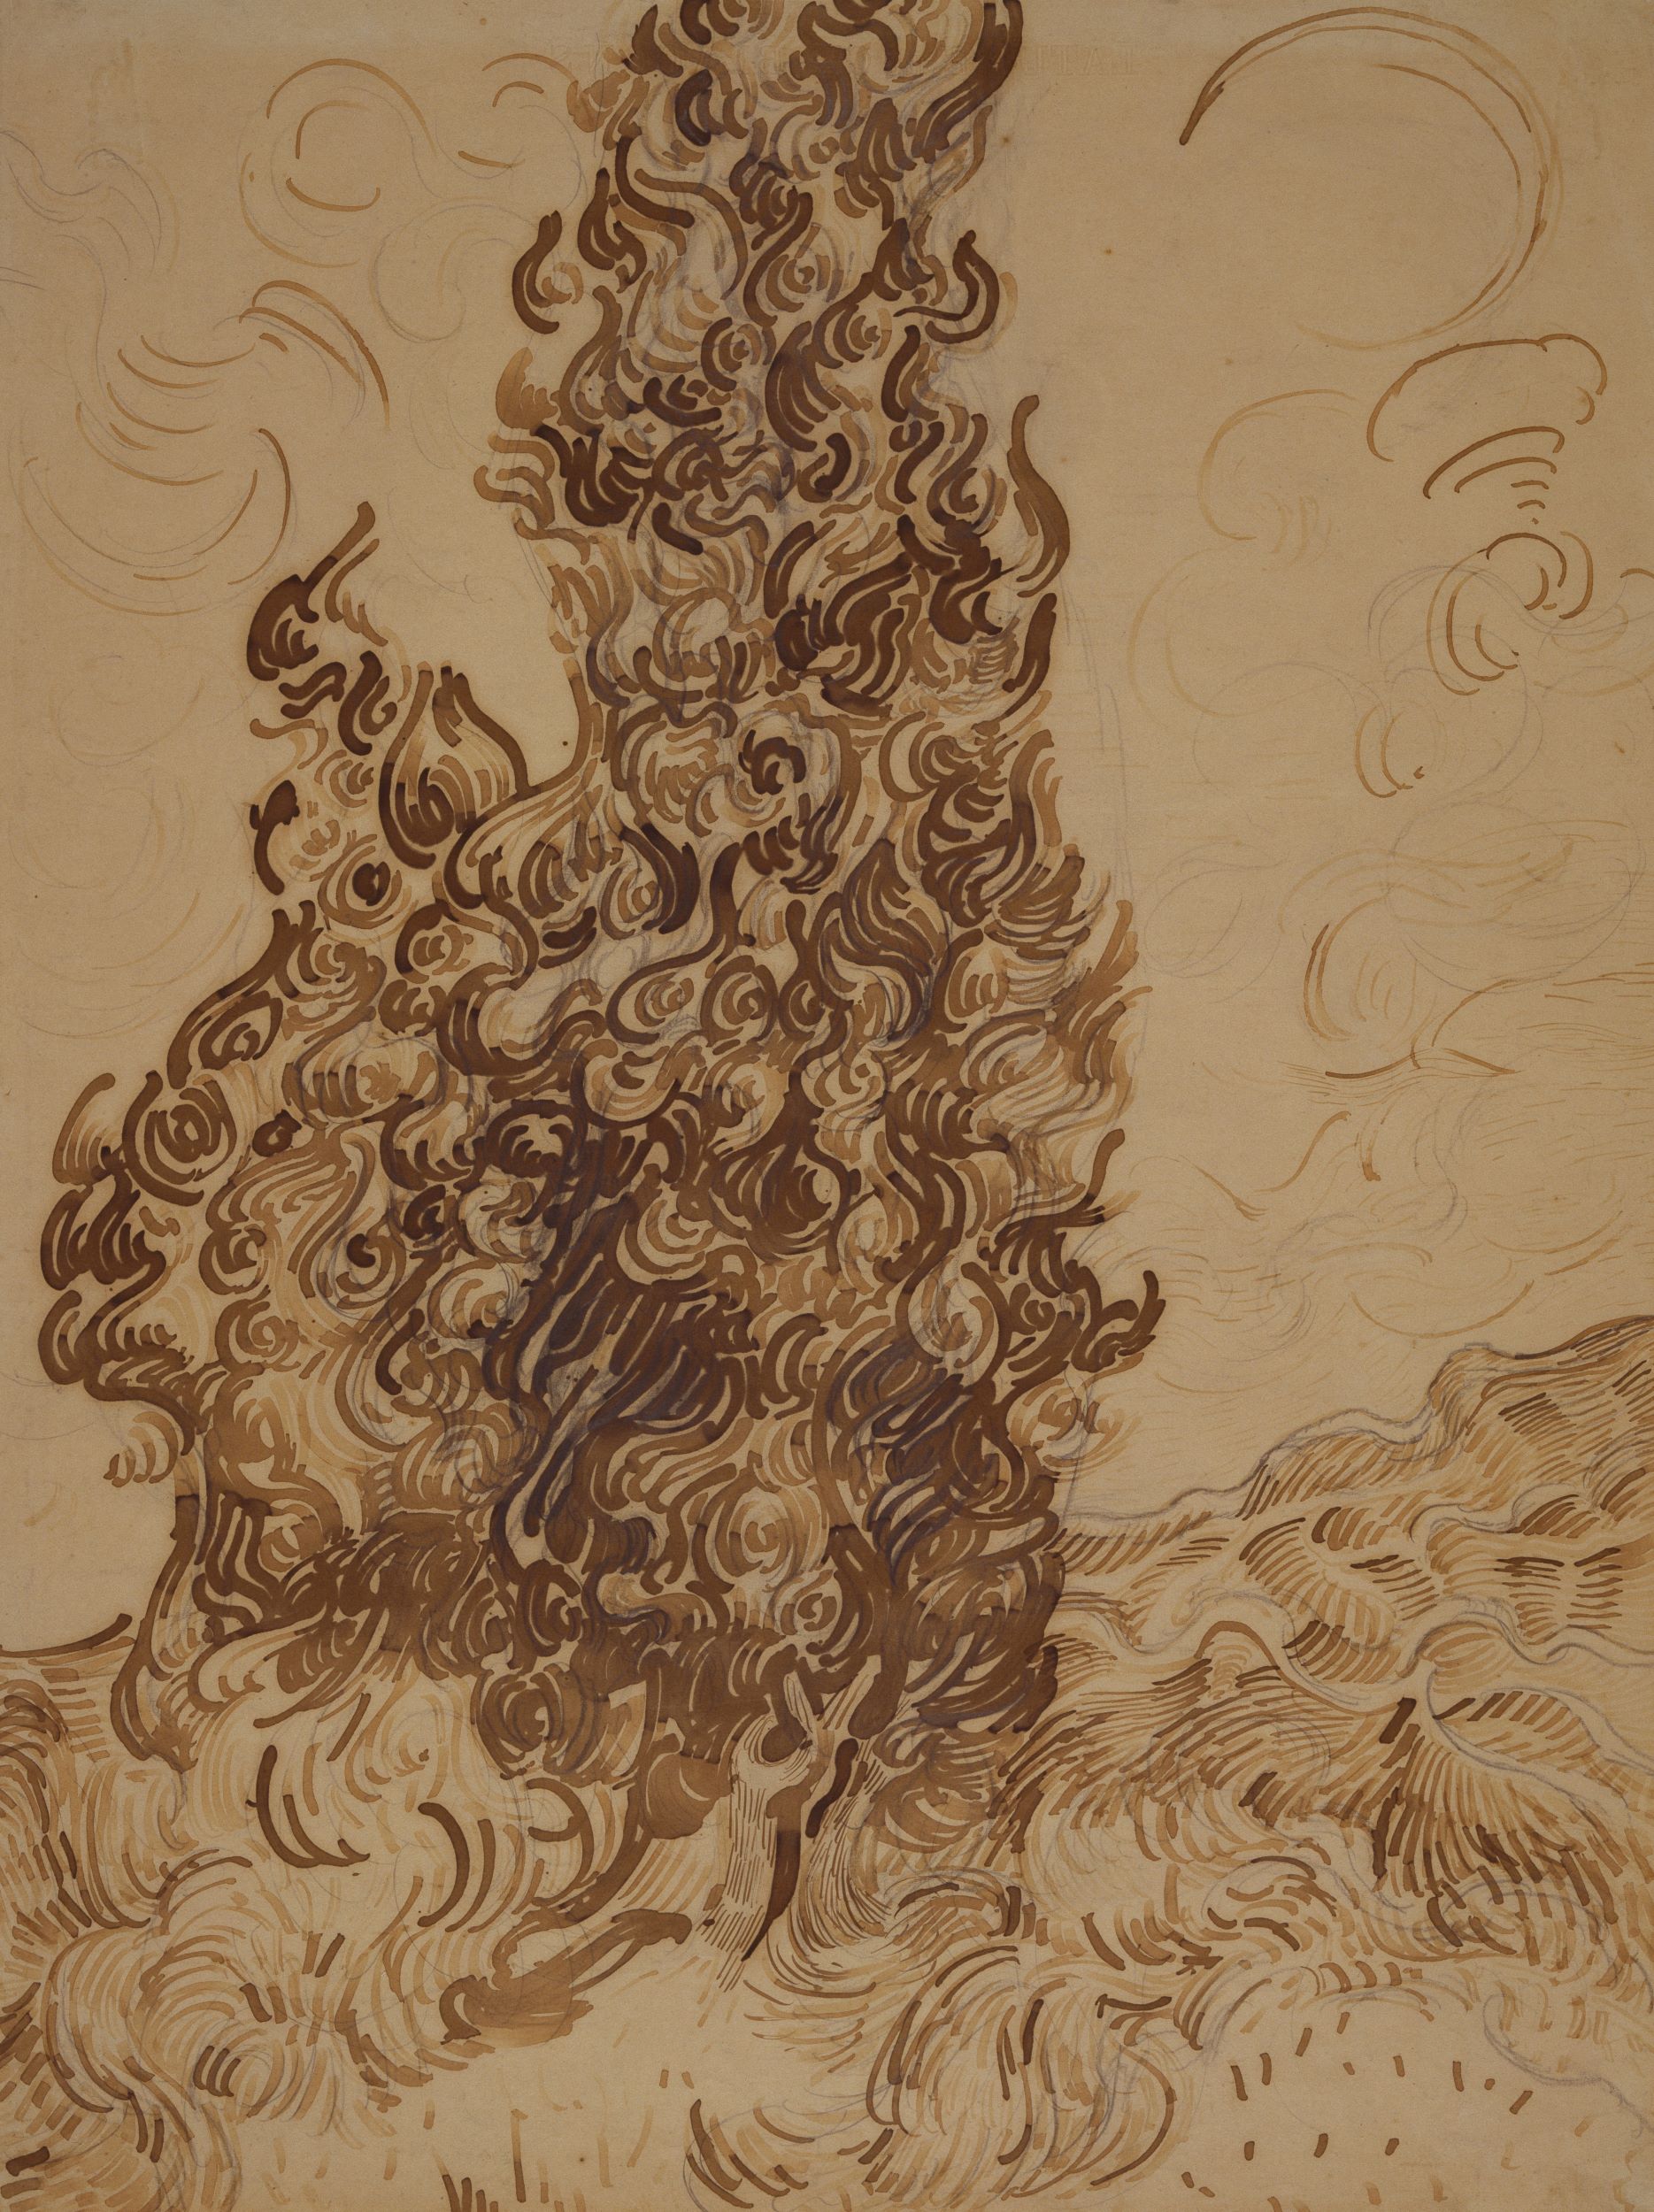 Vincent van Gogh, "Cypresses," June 1889, Brown ink and graphite on wove Latune et Cie Balcons paper 24 3/8 x 18 5/8 in. (61.9 x 47.3 cm), Brooklyn Museum, Frank L. Babbott Fund and A. Augustus Healy Fund (38.123), Photo: Courtesy Brooklyn Museum